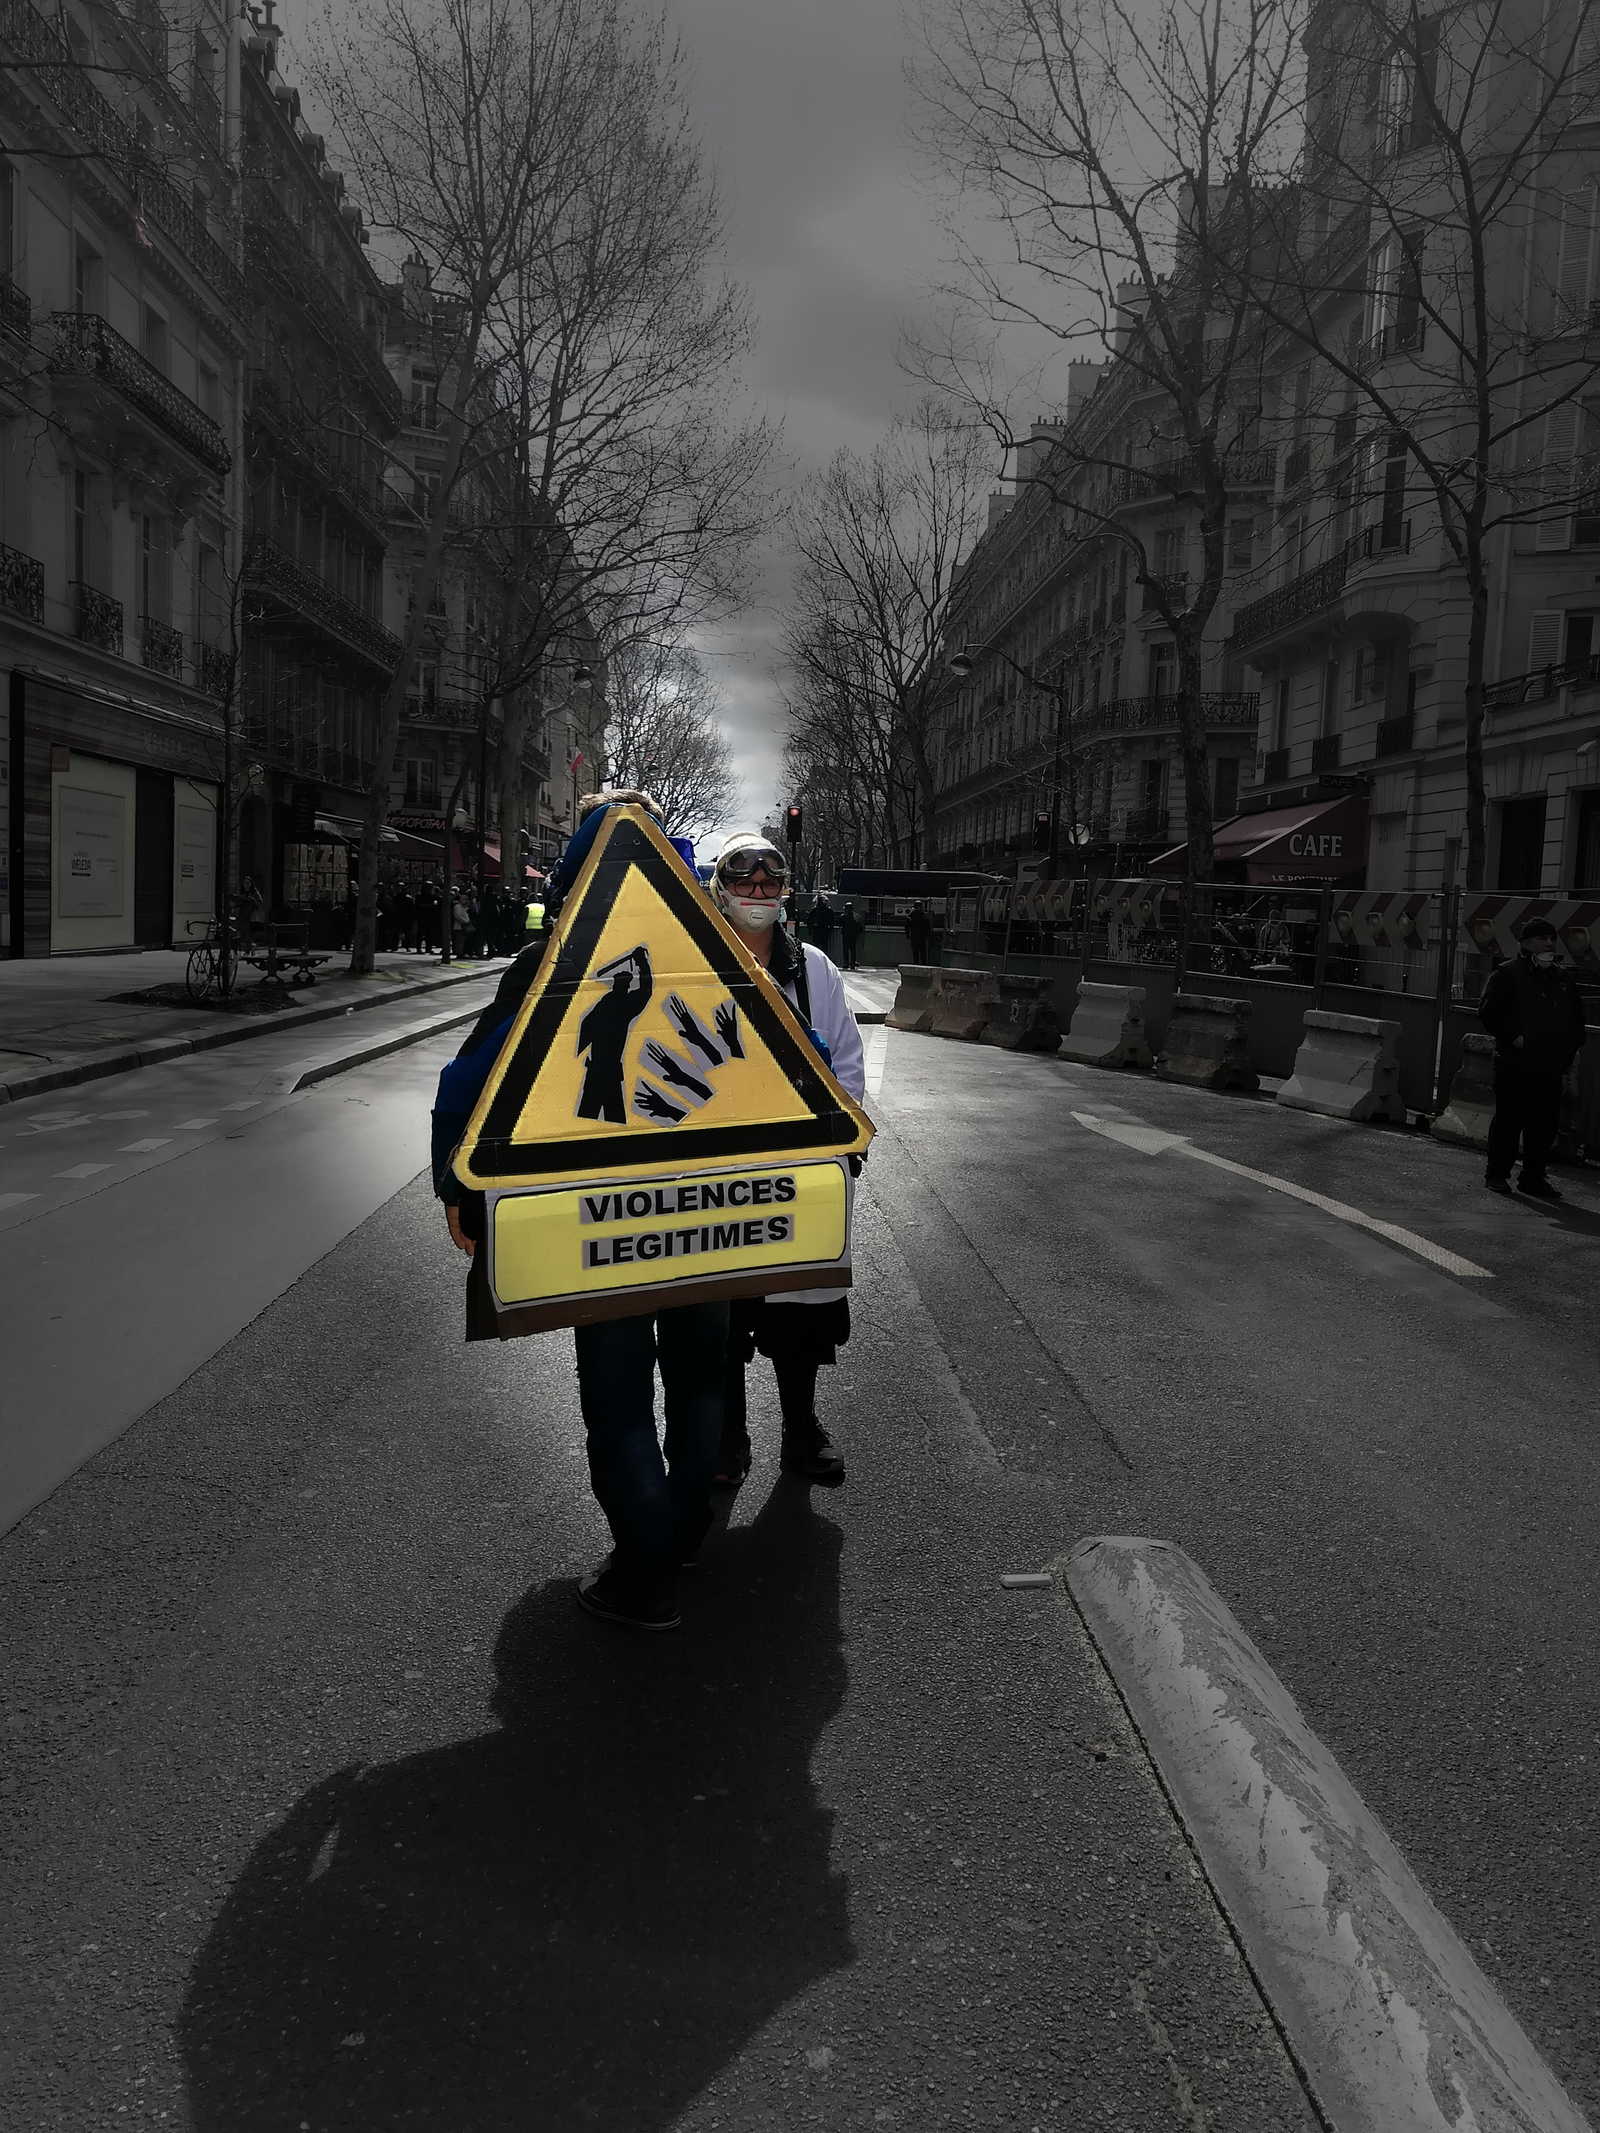 Two protesters of the Yellow Vest mouvement are standing on a street in Paris near the Champs-Elysee. one of the demonstrators is wearing a costume in the form of a warning sign that says: "Legit Violence", while a dark silhouette can be seen beating on hands on the sign. .